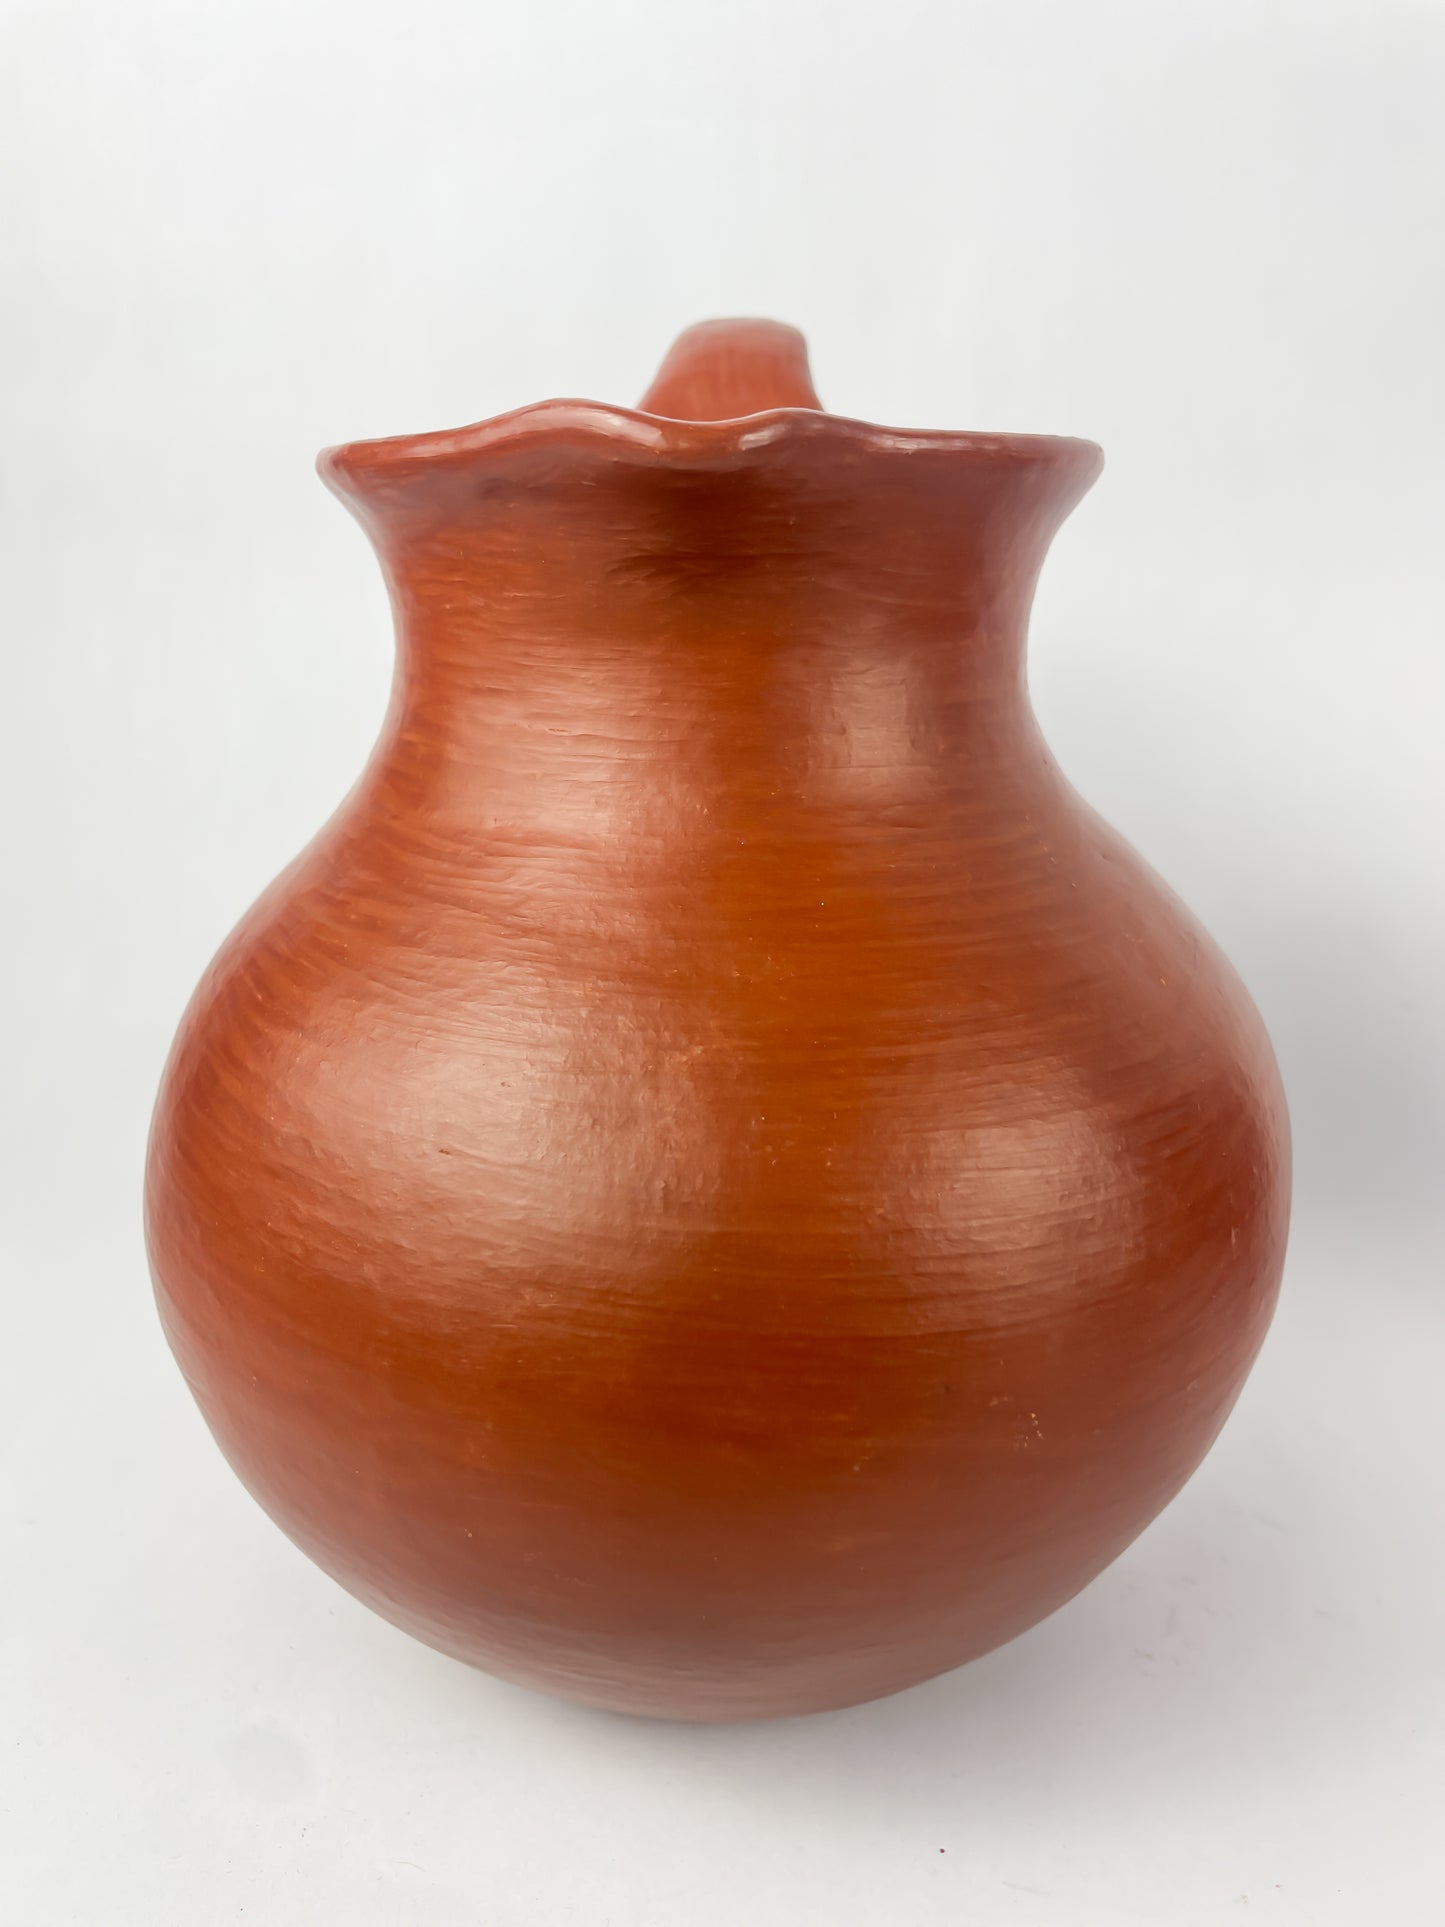 Oaxaca Red Clay Pottery Pitcher Mexican Red Clay Pottery Oaxaca Clay Pottery San Marcos Tlapazola Red Clay Pottery